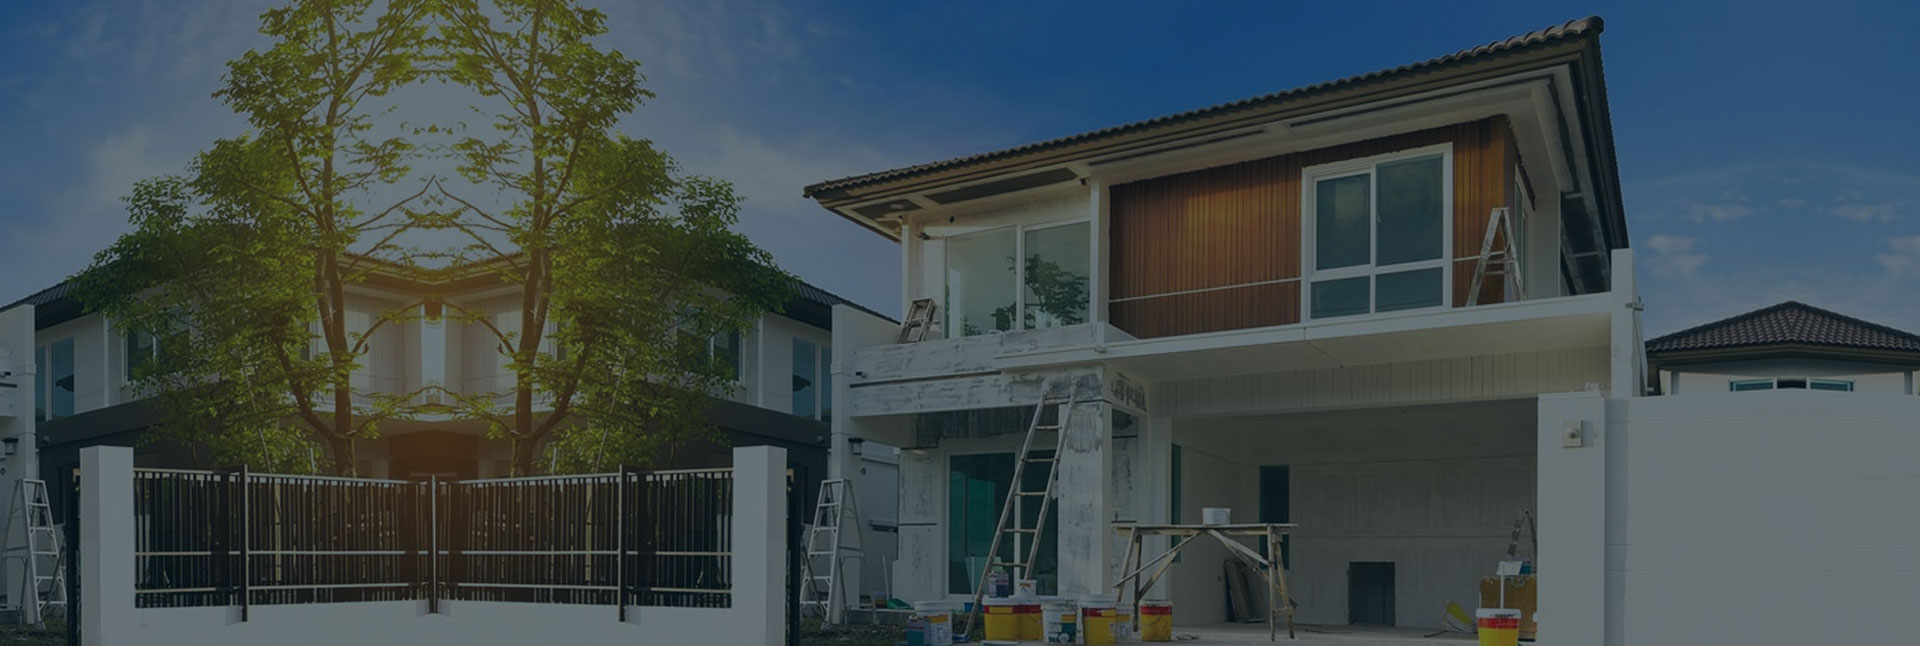 Exterior Painting Services Kochi